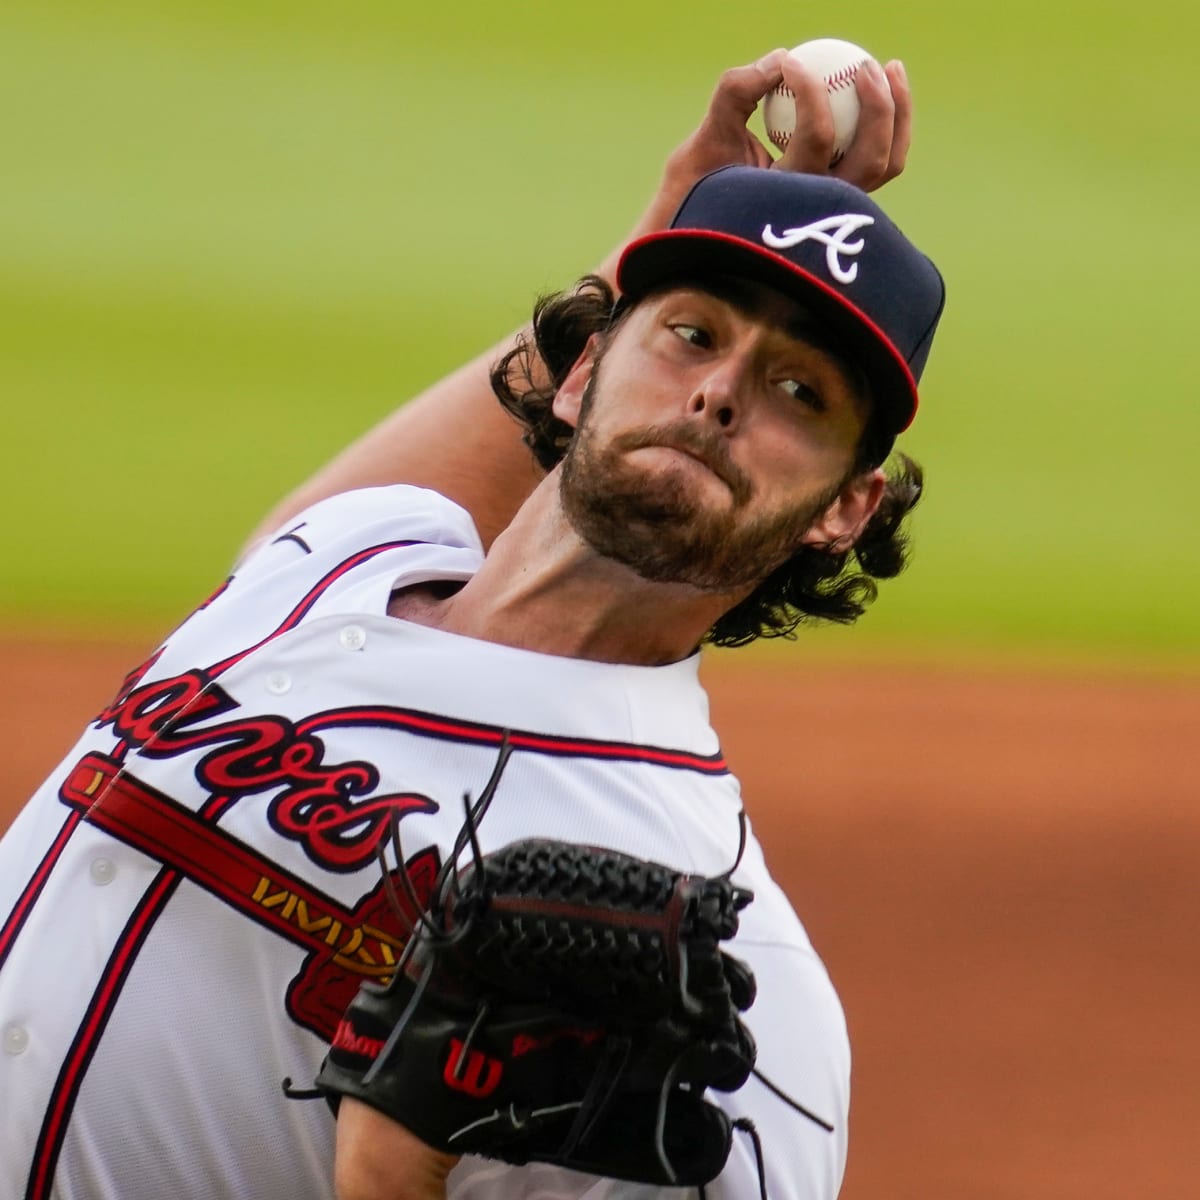 Braves starter Ian Anderson not happy after tough afternoon against Red Sox